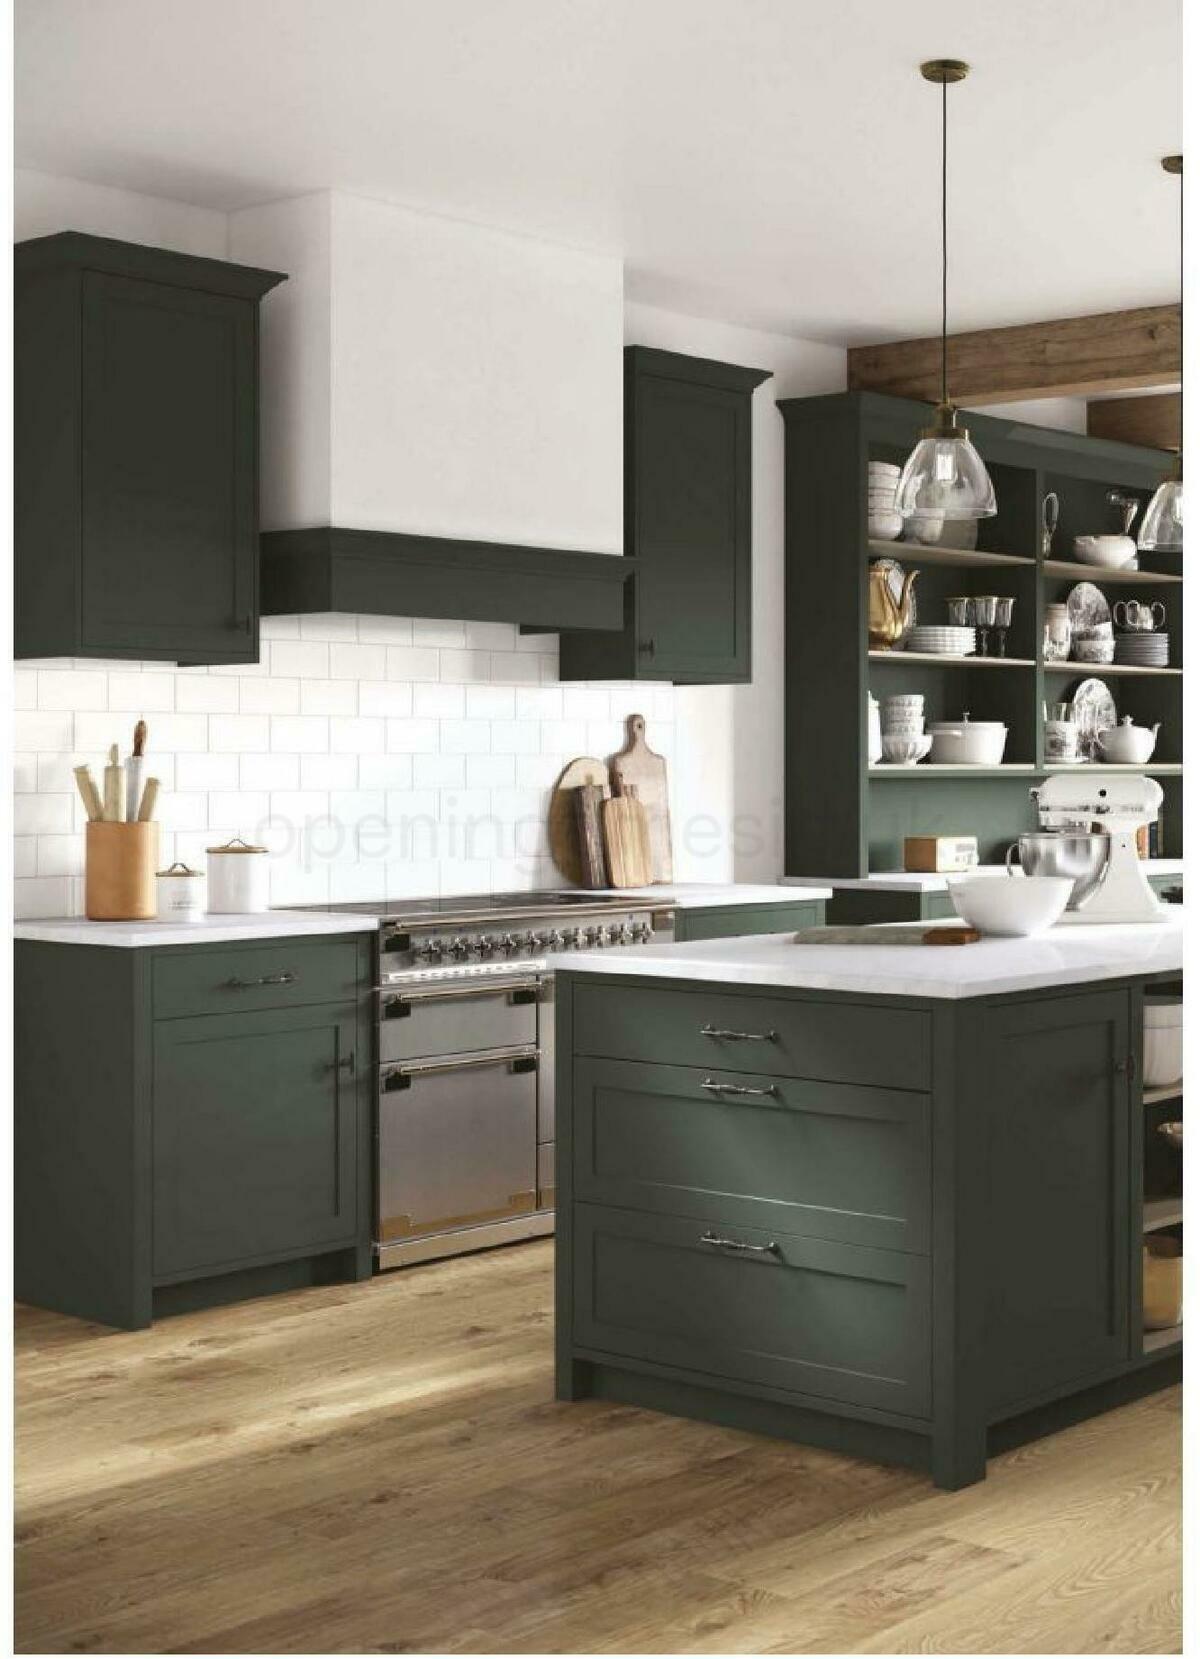 Wickes Kitchens brochure Offers from 15 July